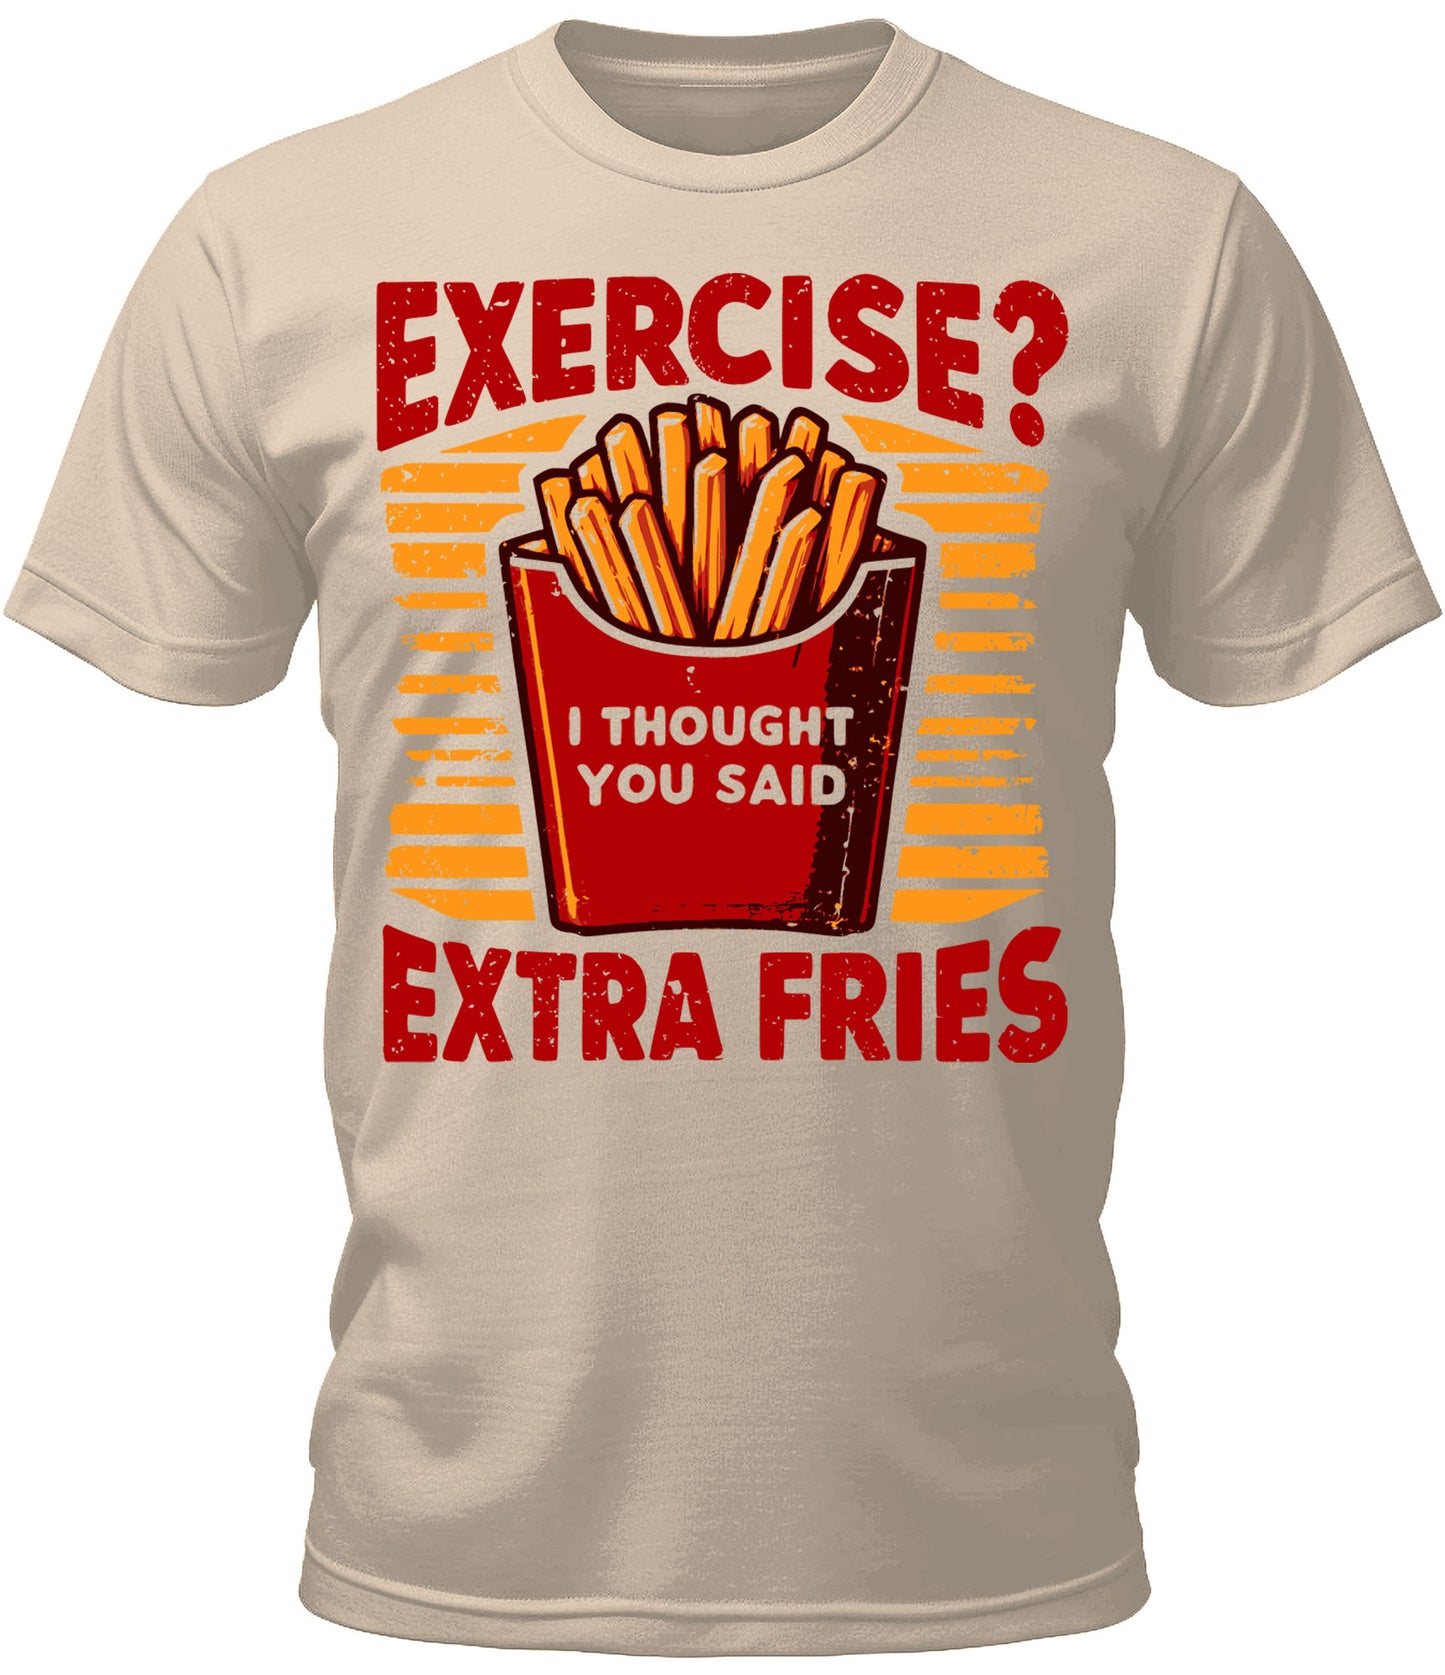 Men's Exercise? Extra Fries Funny Graphic Tee